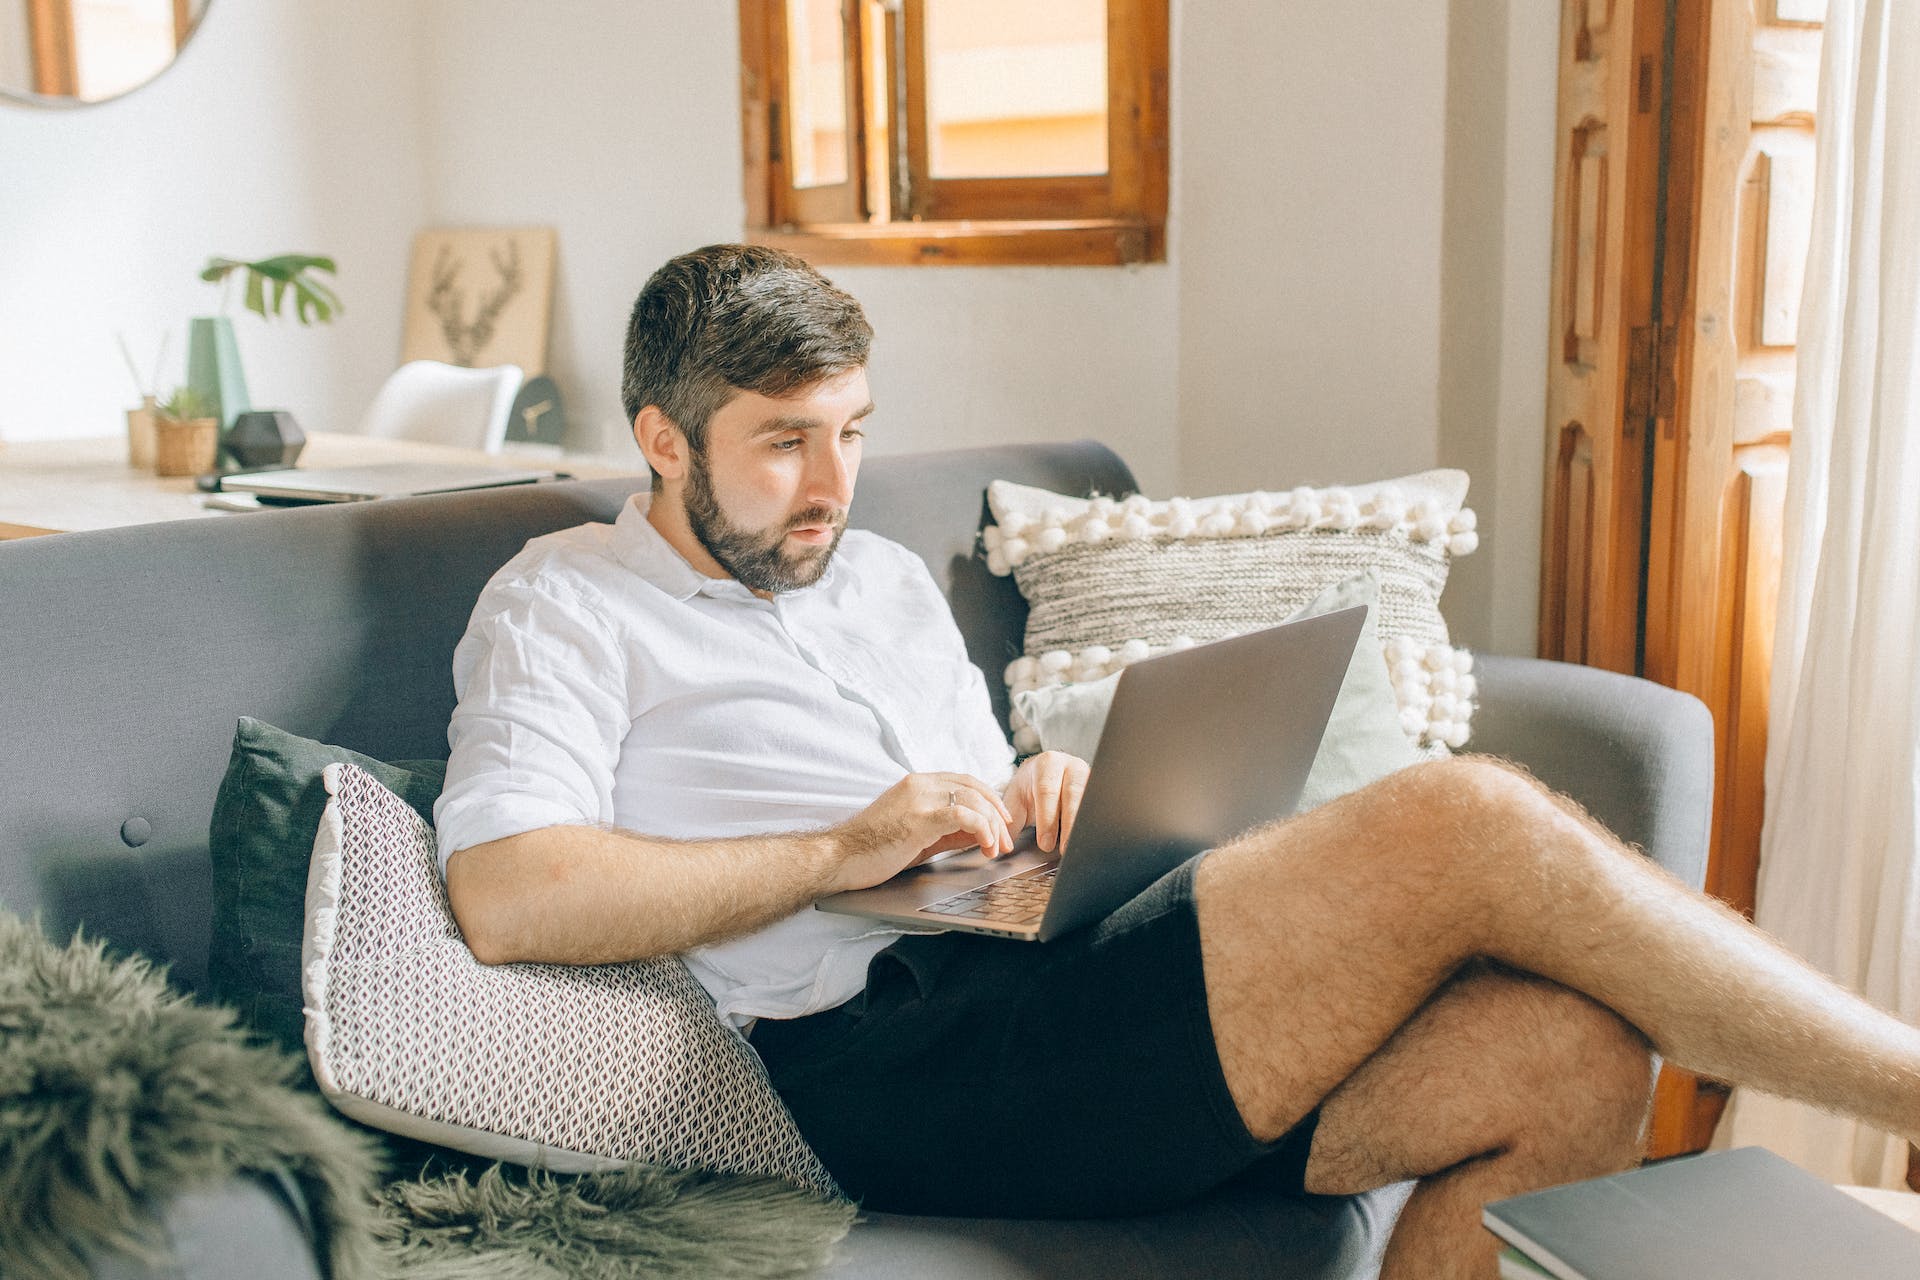 Man using laptop on couch | Source: Pexels